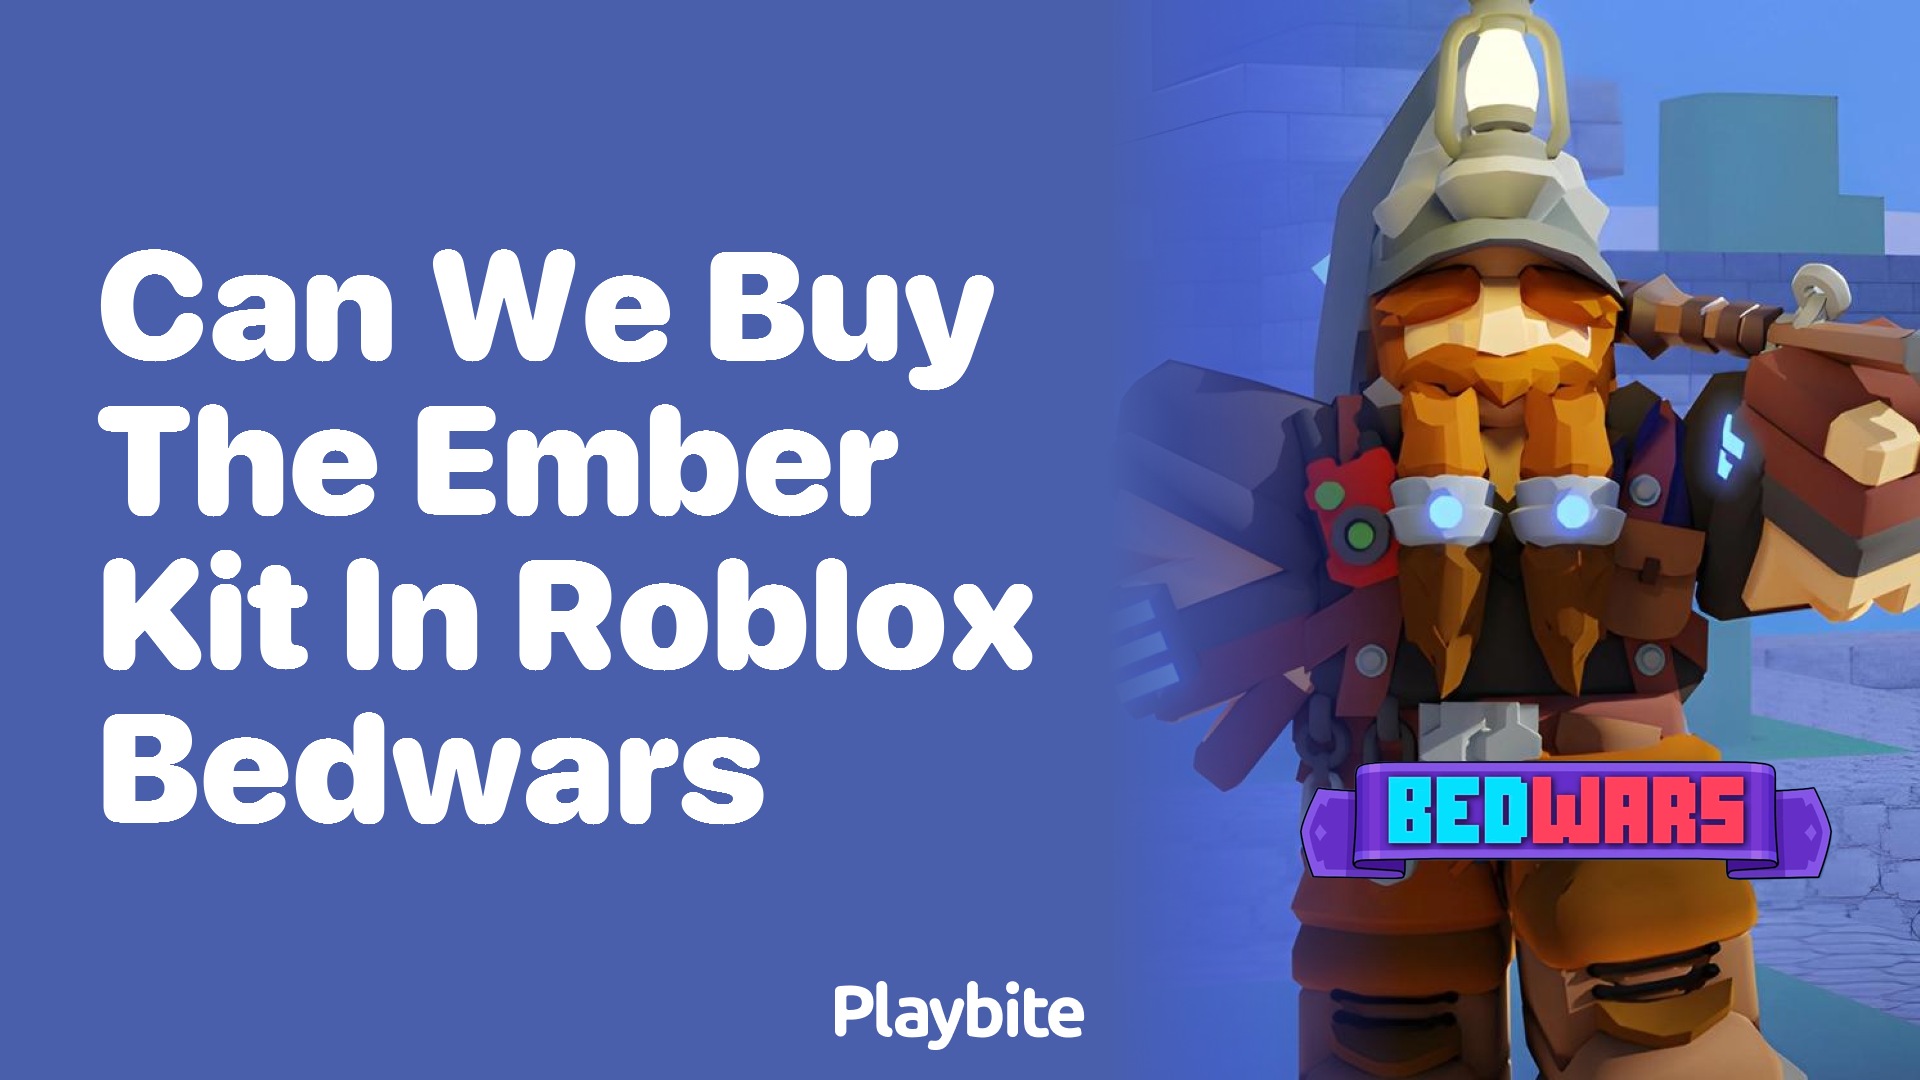 Can We Buy the Ember Kit in Roblox Bedwars?